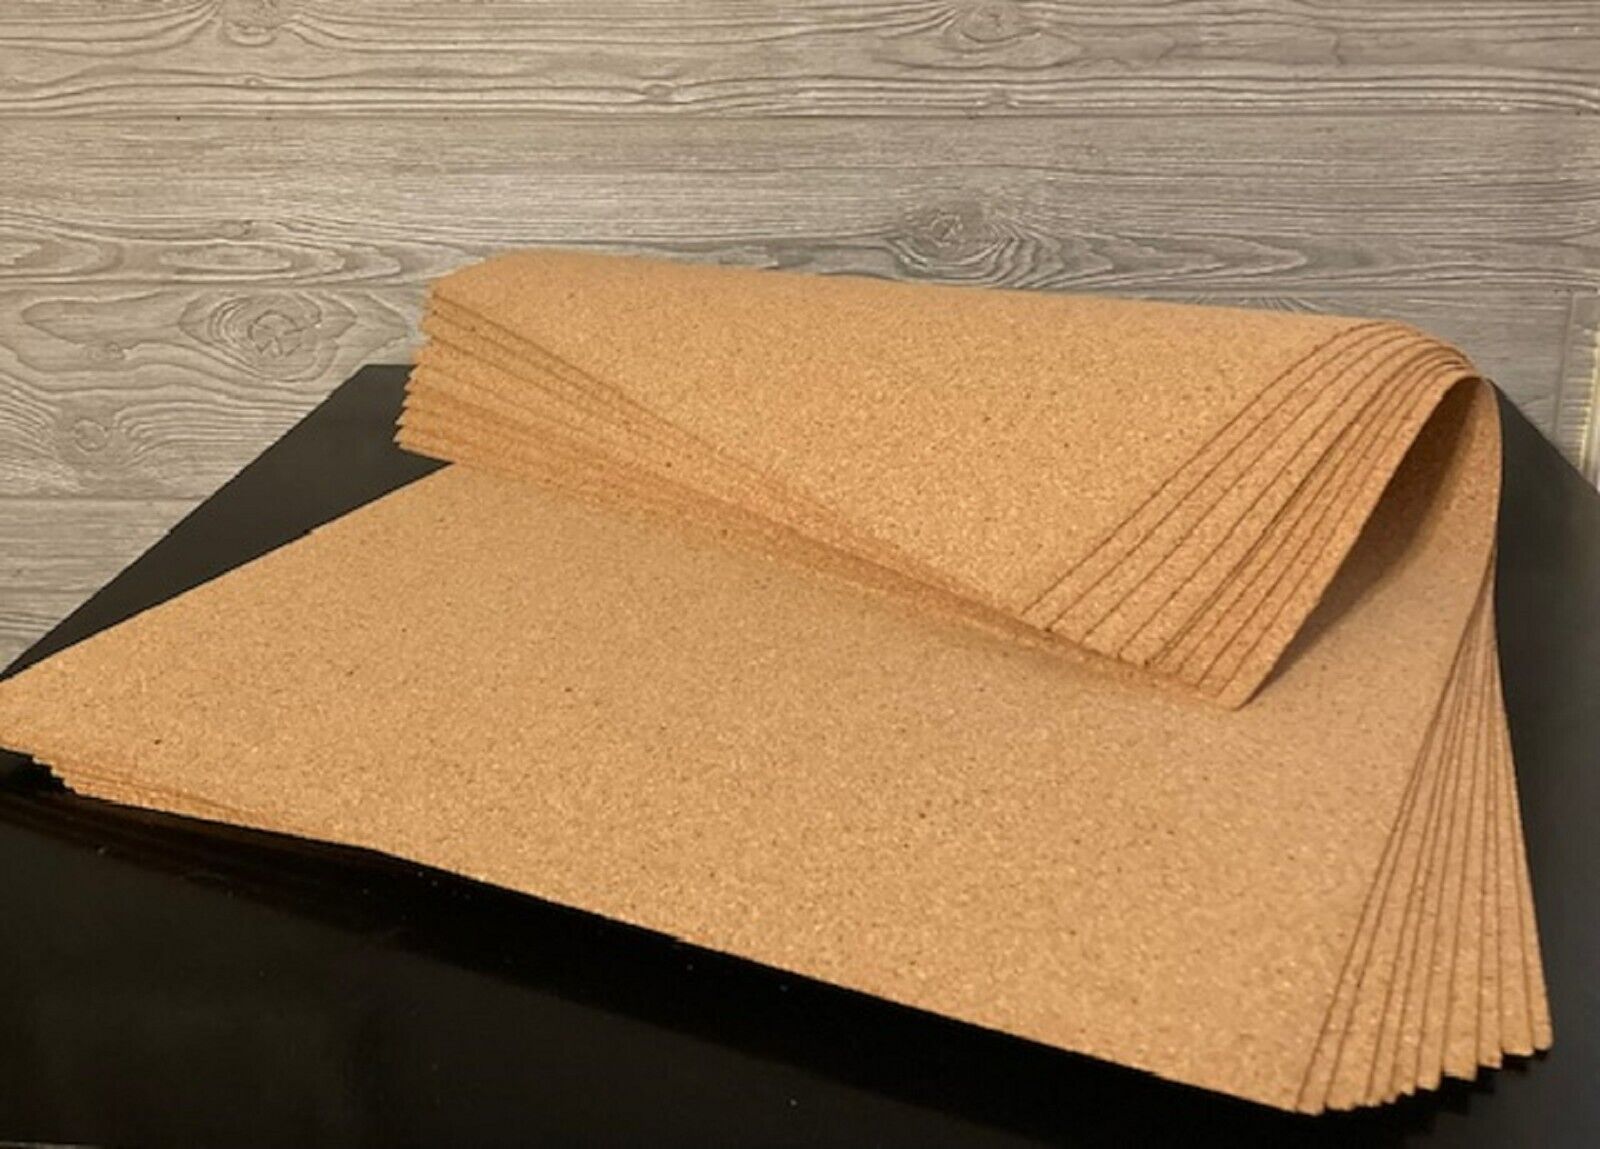 100% Natural Cork Sheets. 1/16" (2mm) Thick. 10 Pieces 20"x 30"